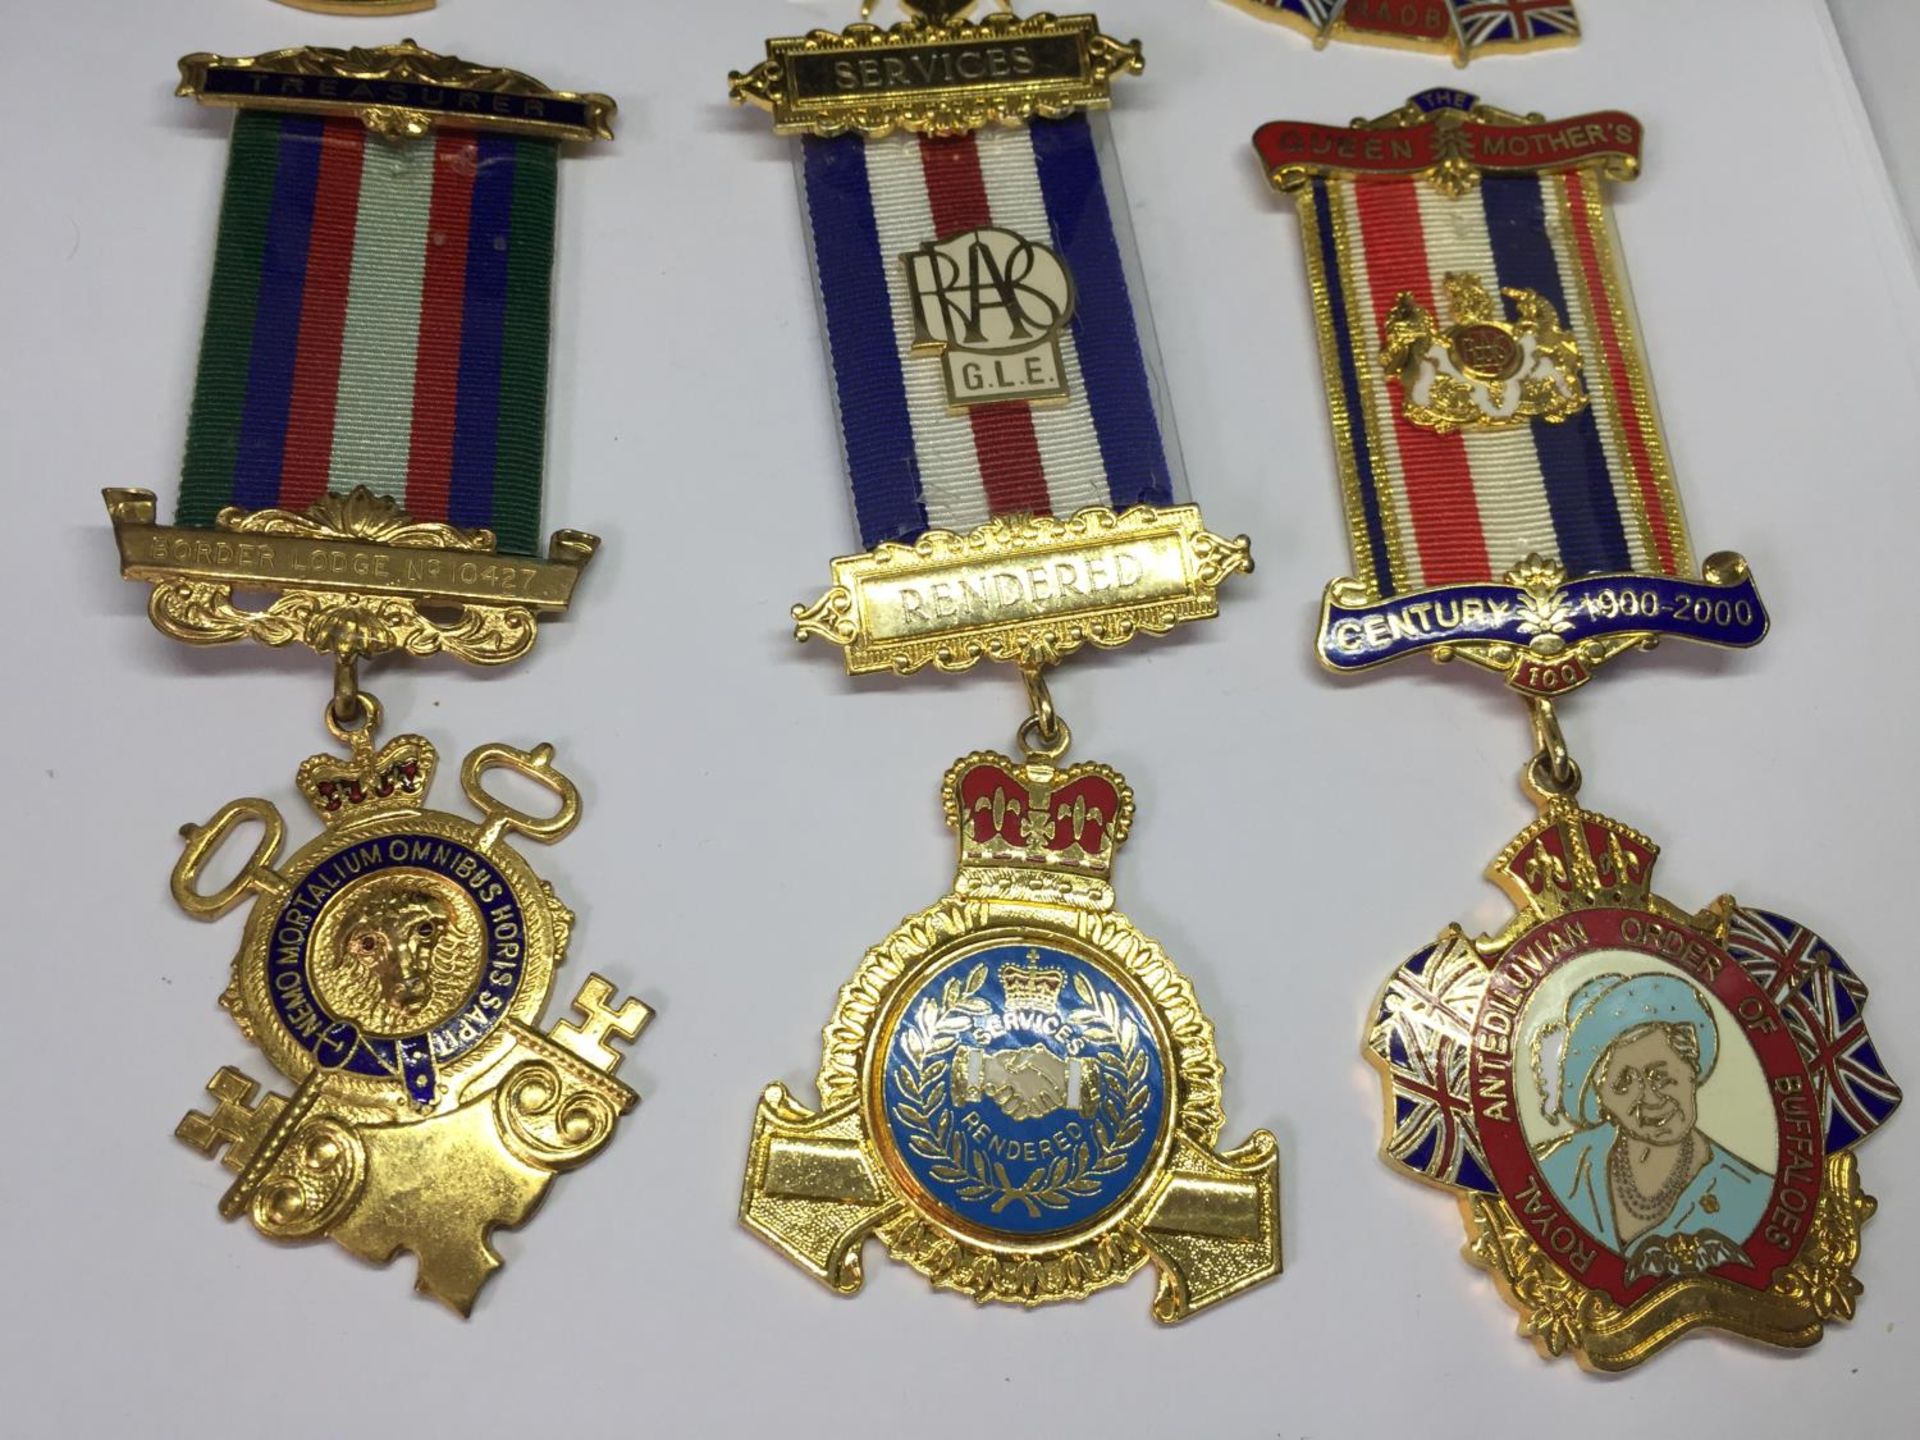 SIX ORDER OF THE BUFFALOS MEDALS - Image 3 of 4